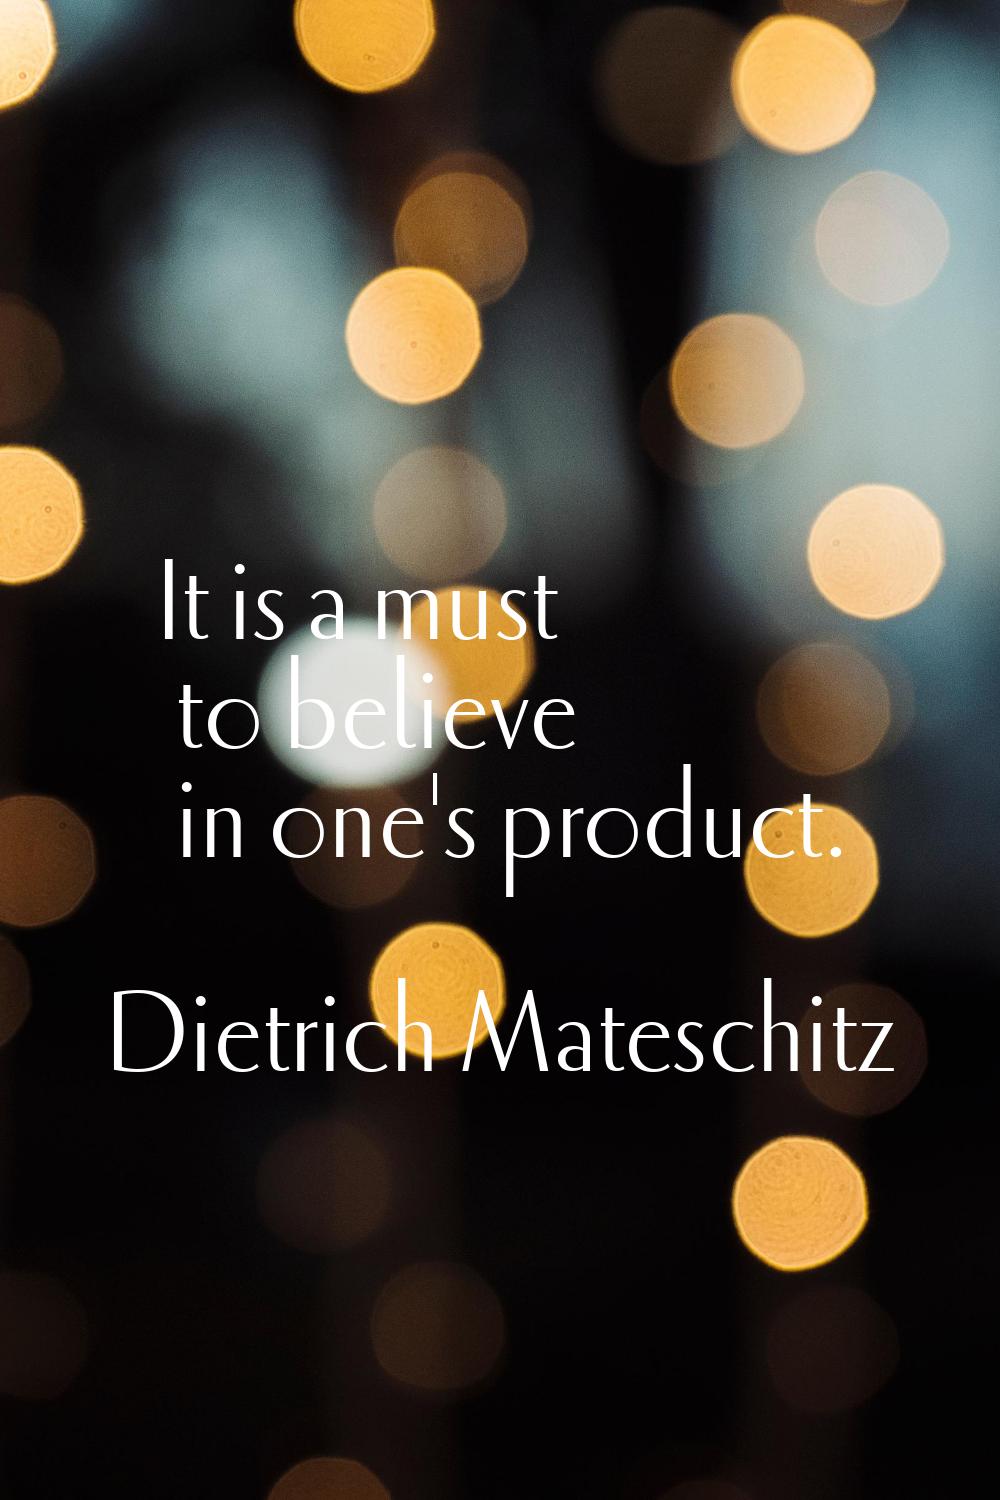 It is a must to believe in one's product.